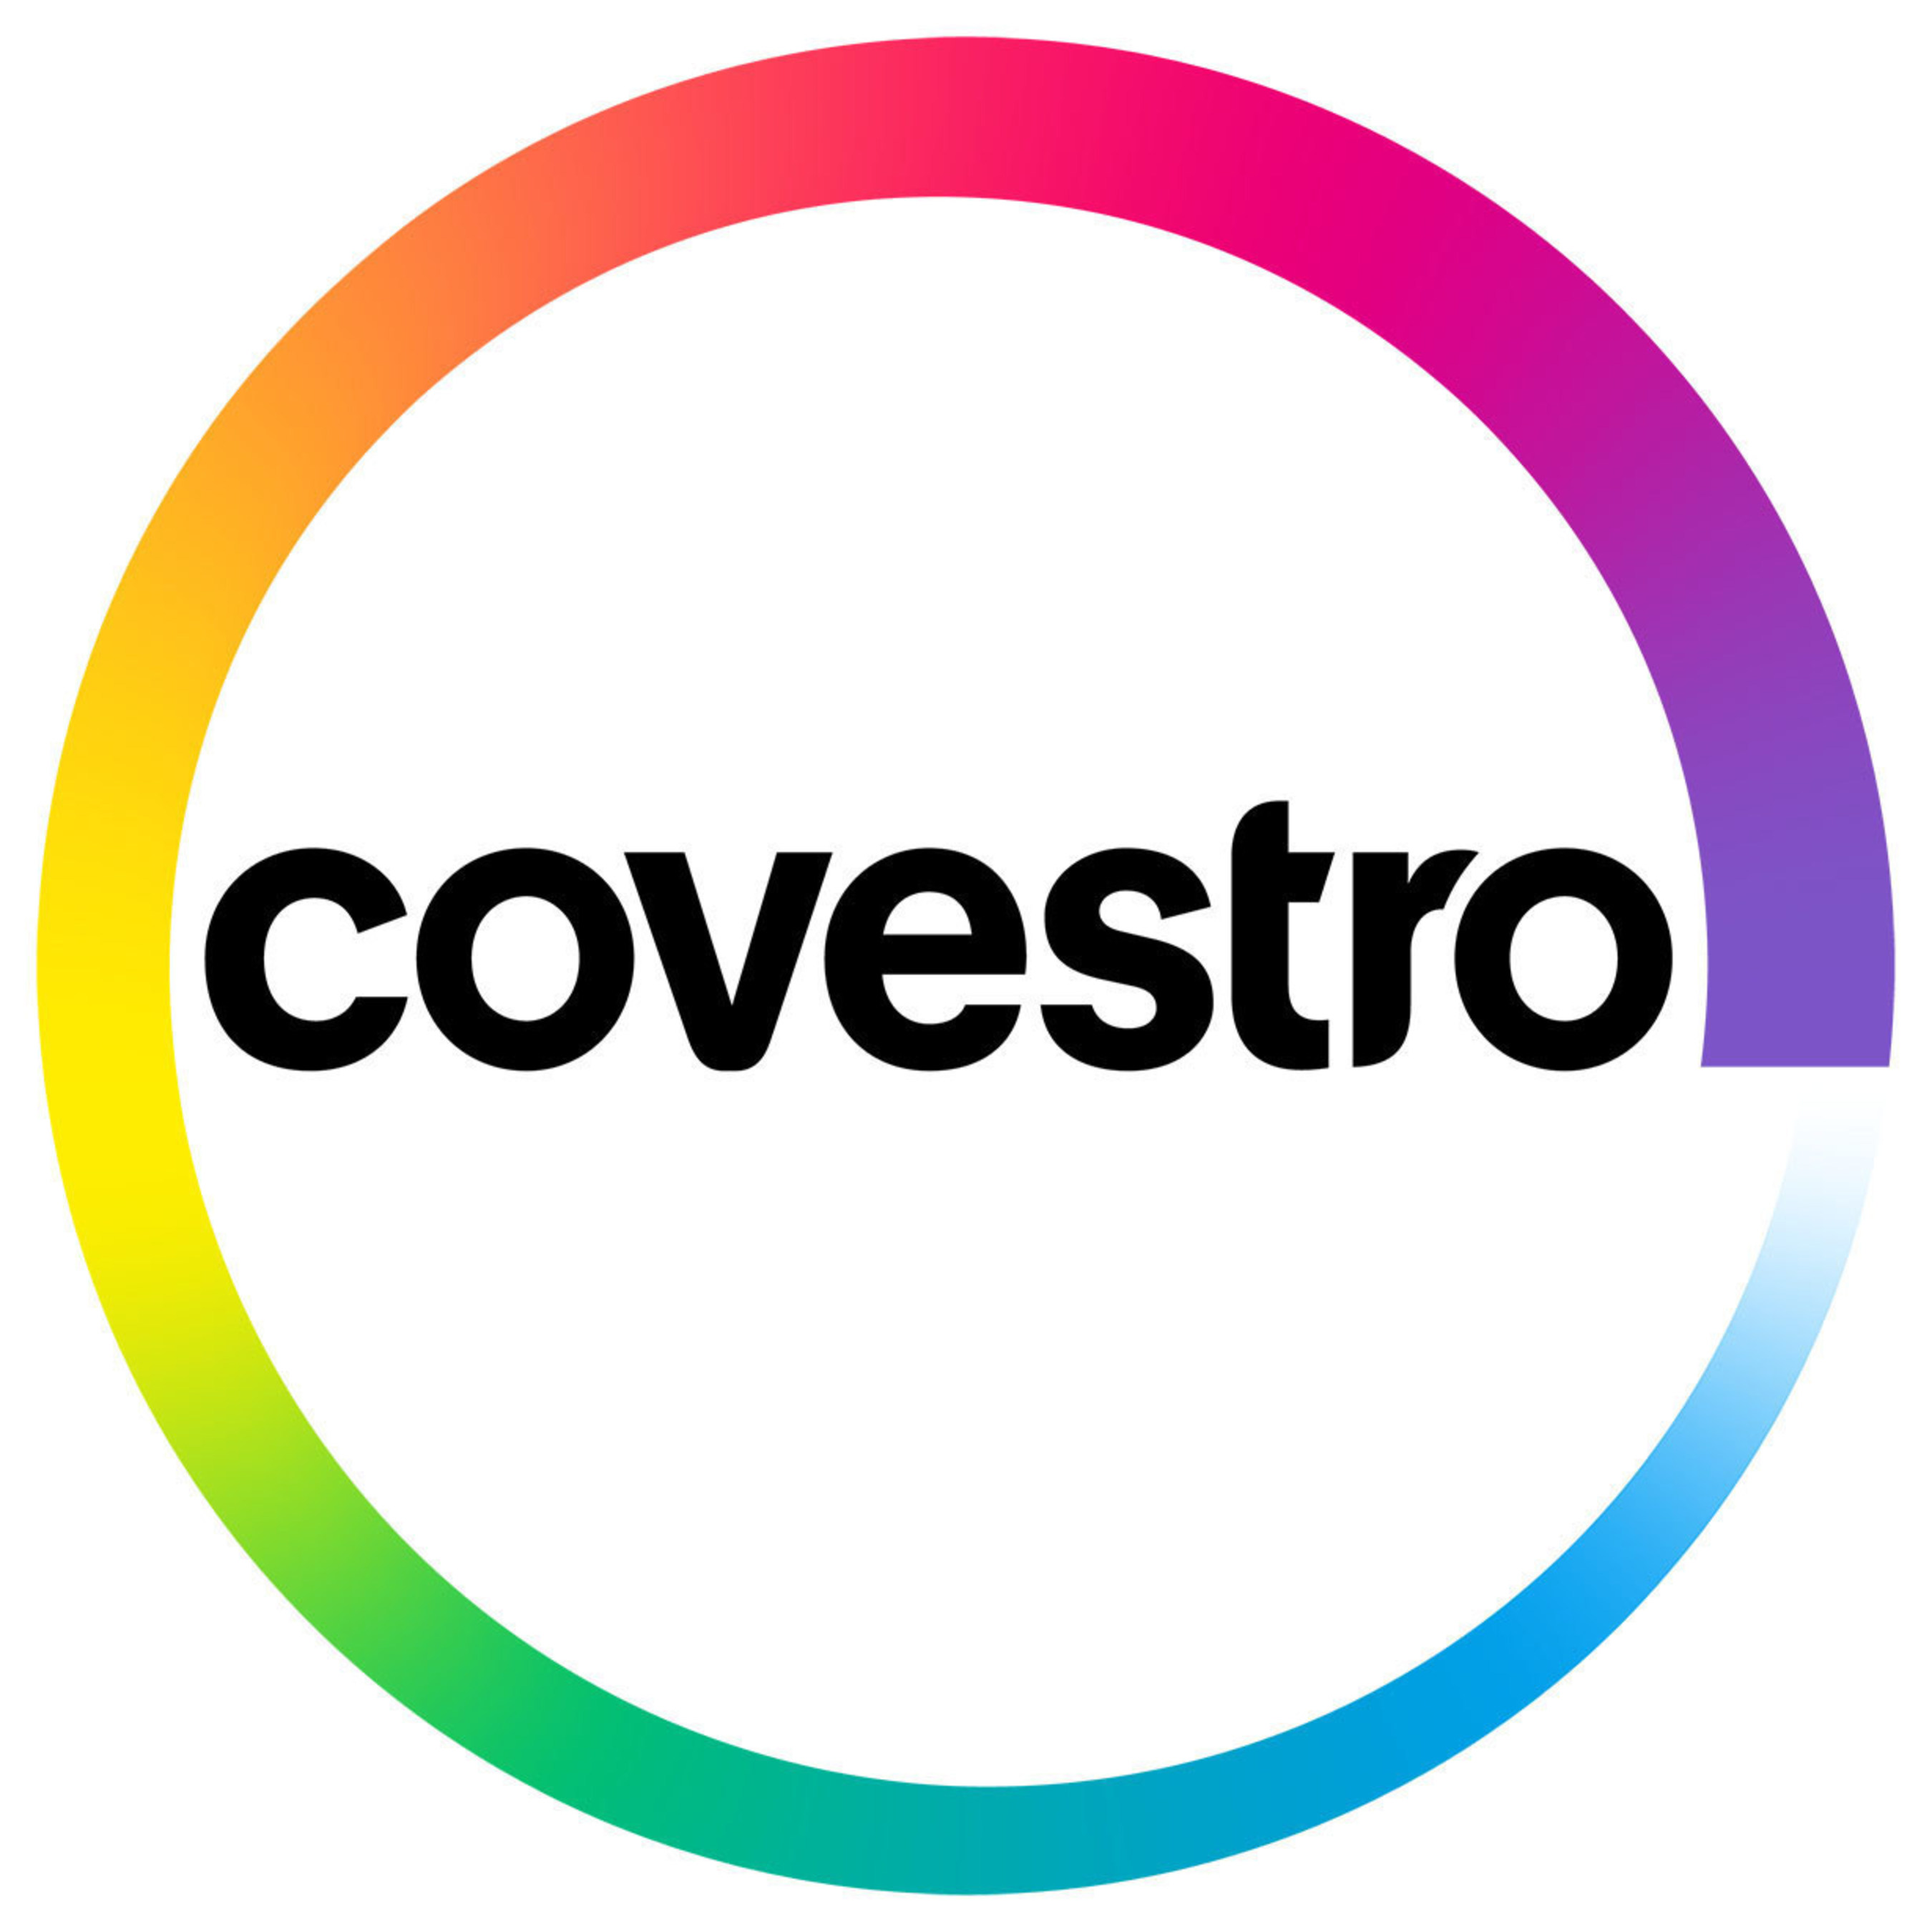 Composite pallet utilizing Covestro polyurethane resin delivers supply chain innovation